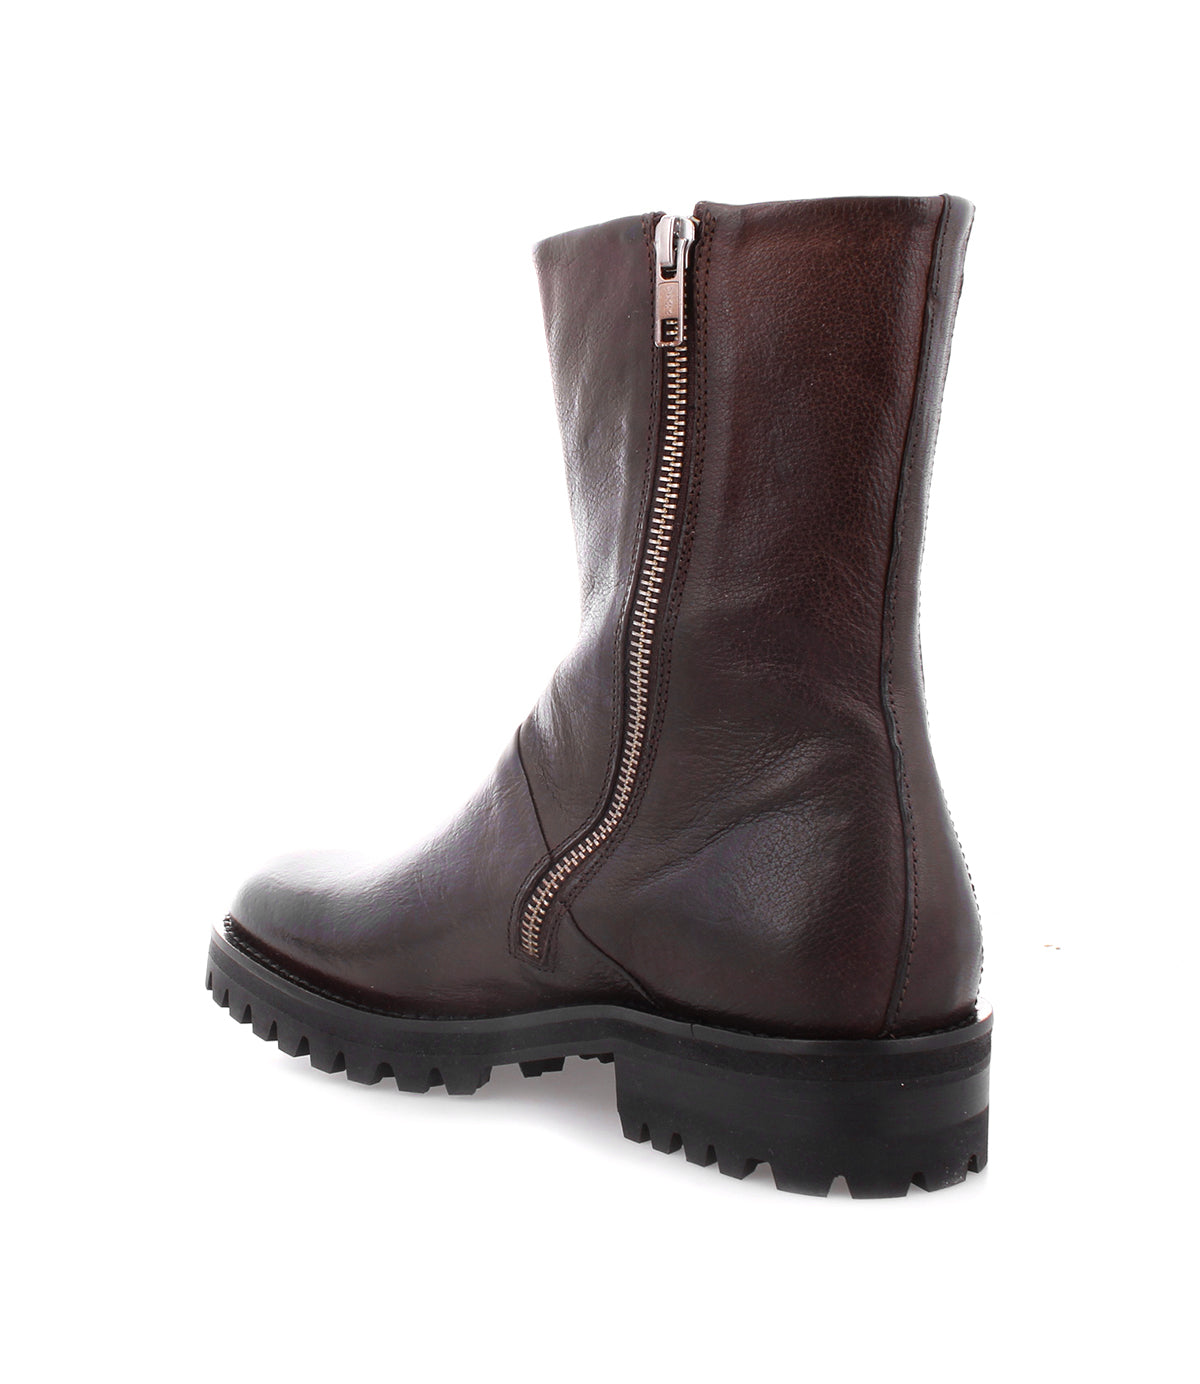 A durable Bed Stu Italian leather ankle boot with a side zipper for convenience.